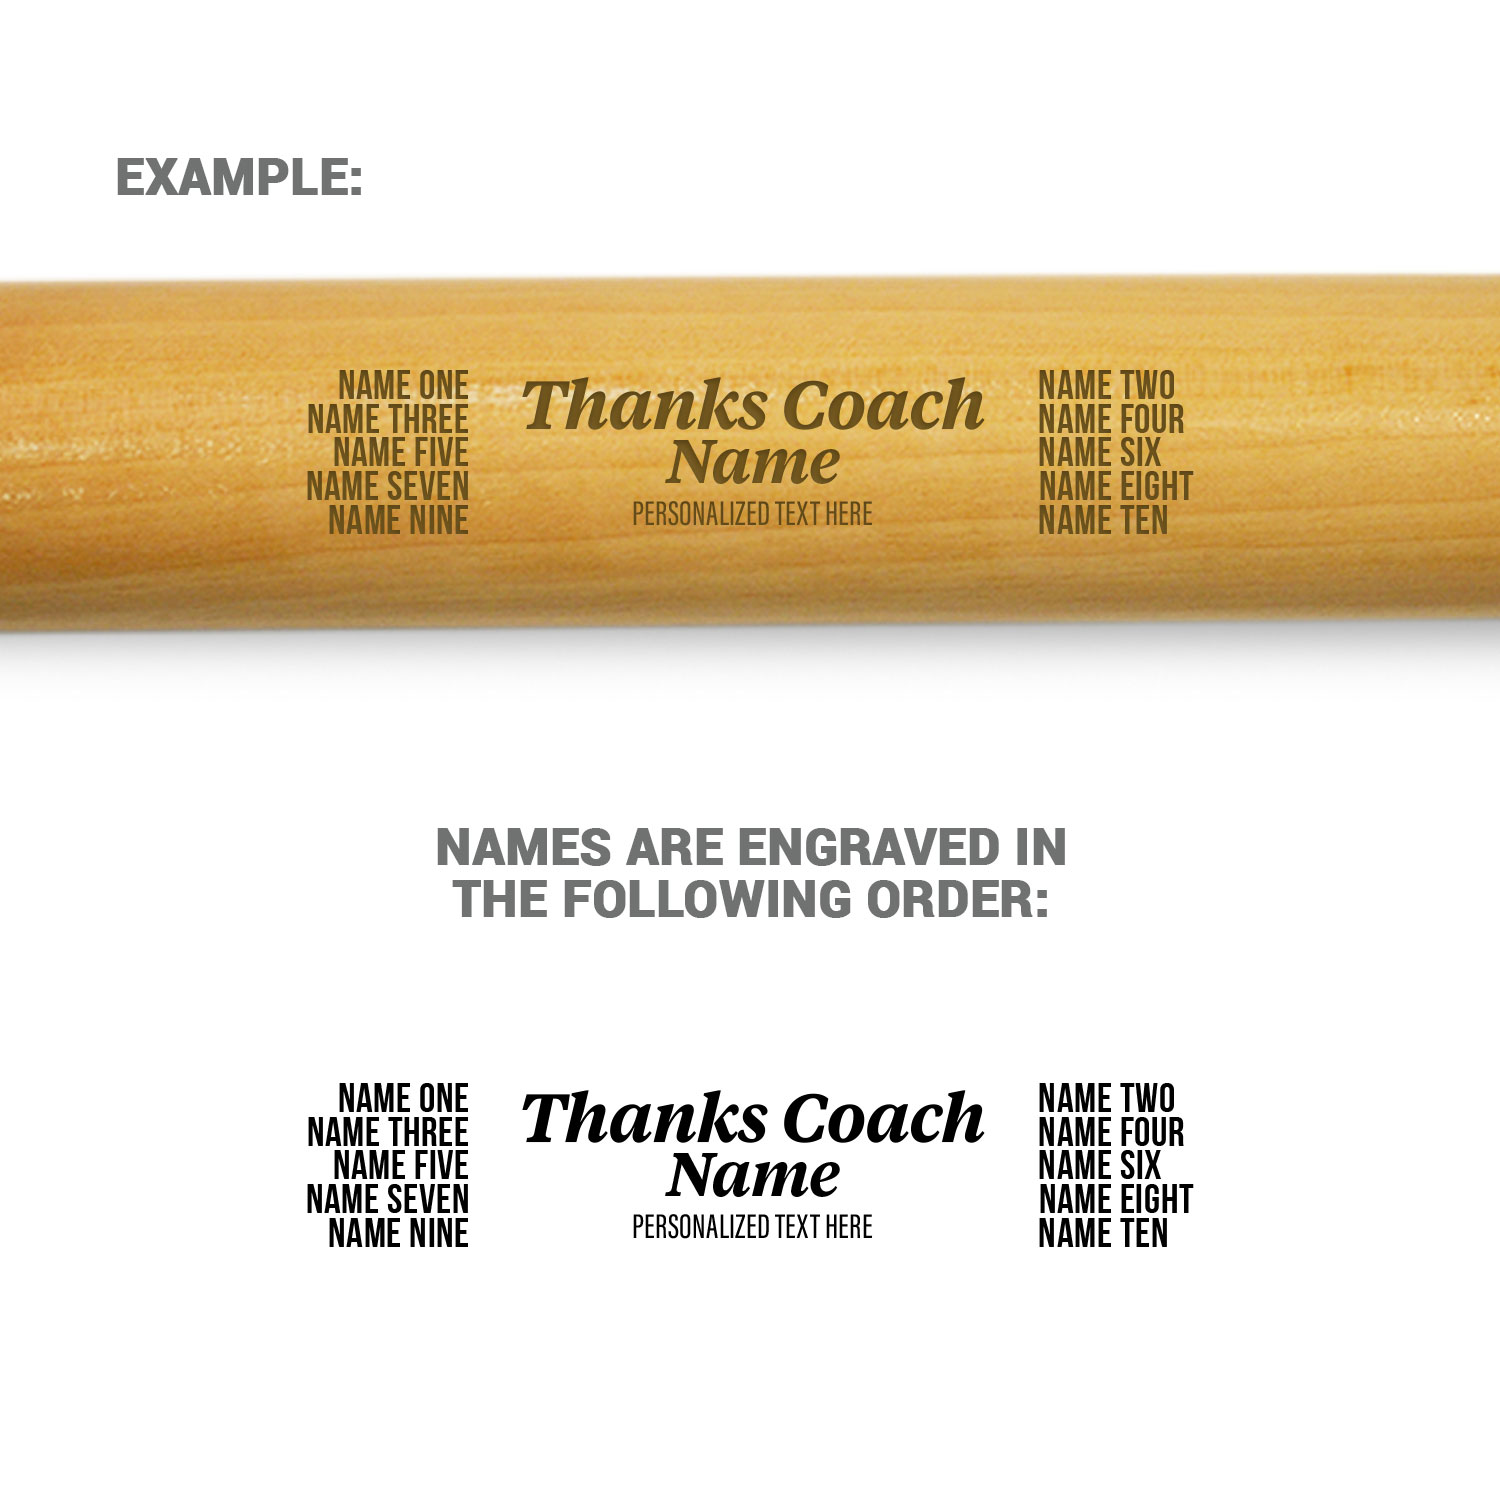 Engraved Mini Baseball Bat - Thanks Coach With Roster - Personalization Image